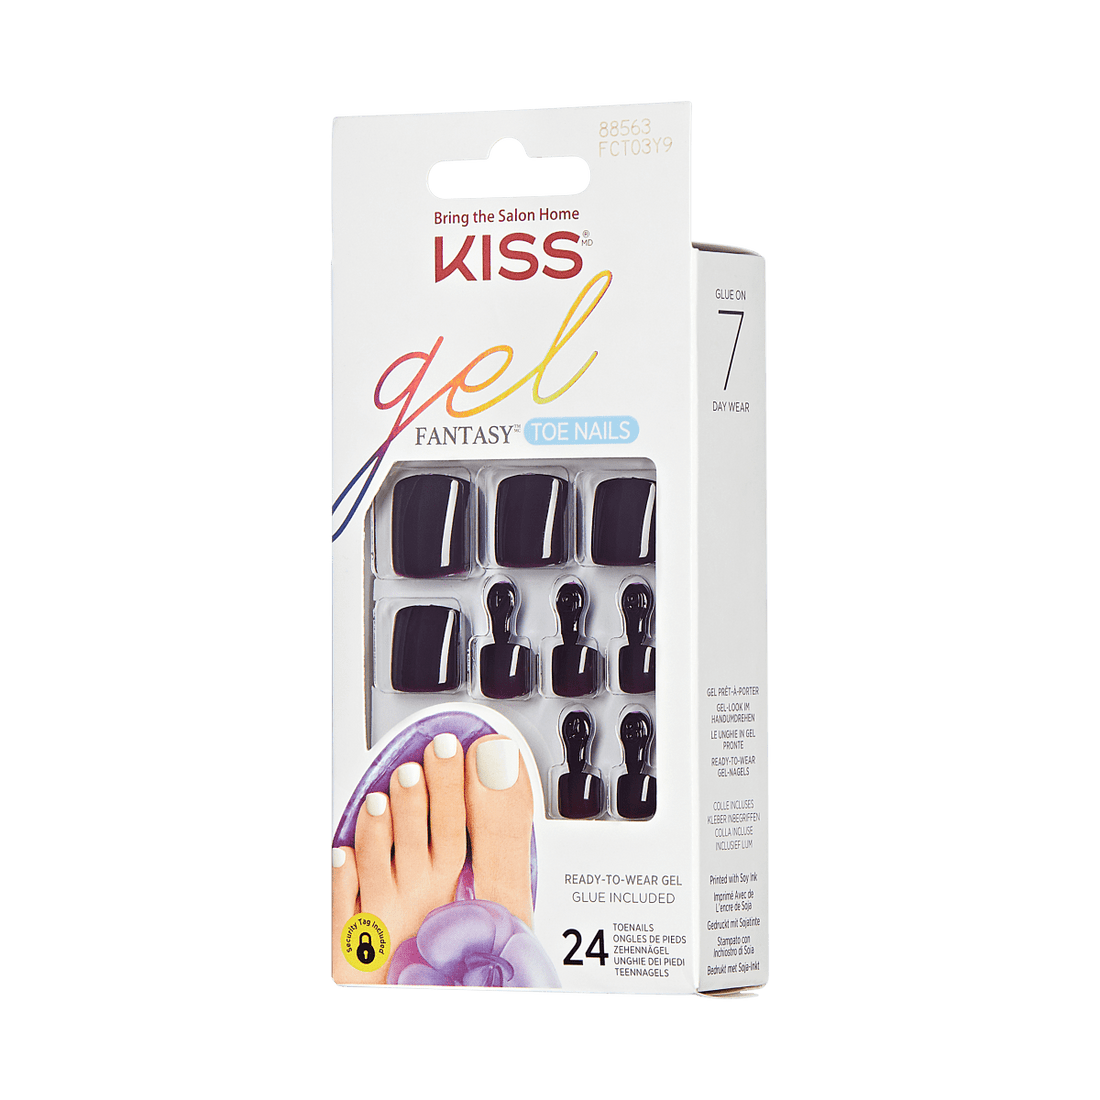 KISS Gel Fantasy, Press-On Nails, Dark Chocolate, Red, Pedicure Squoval, 24ct